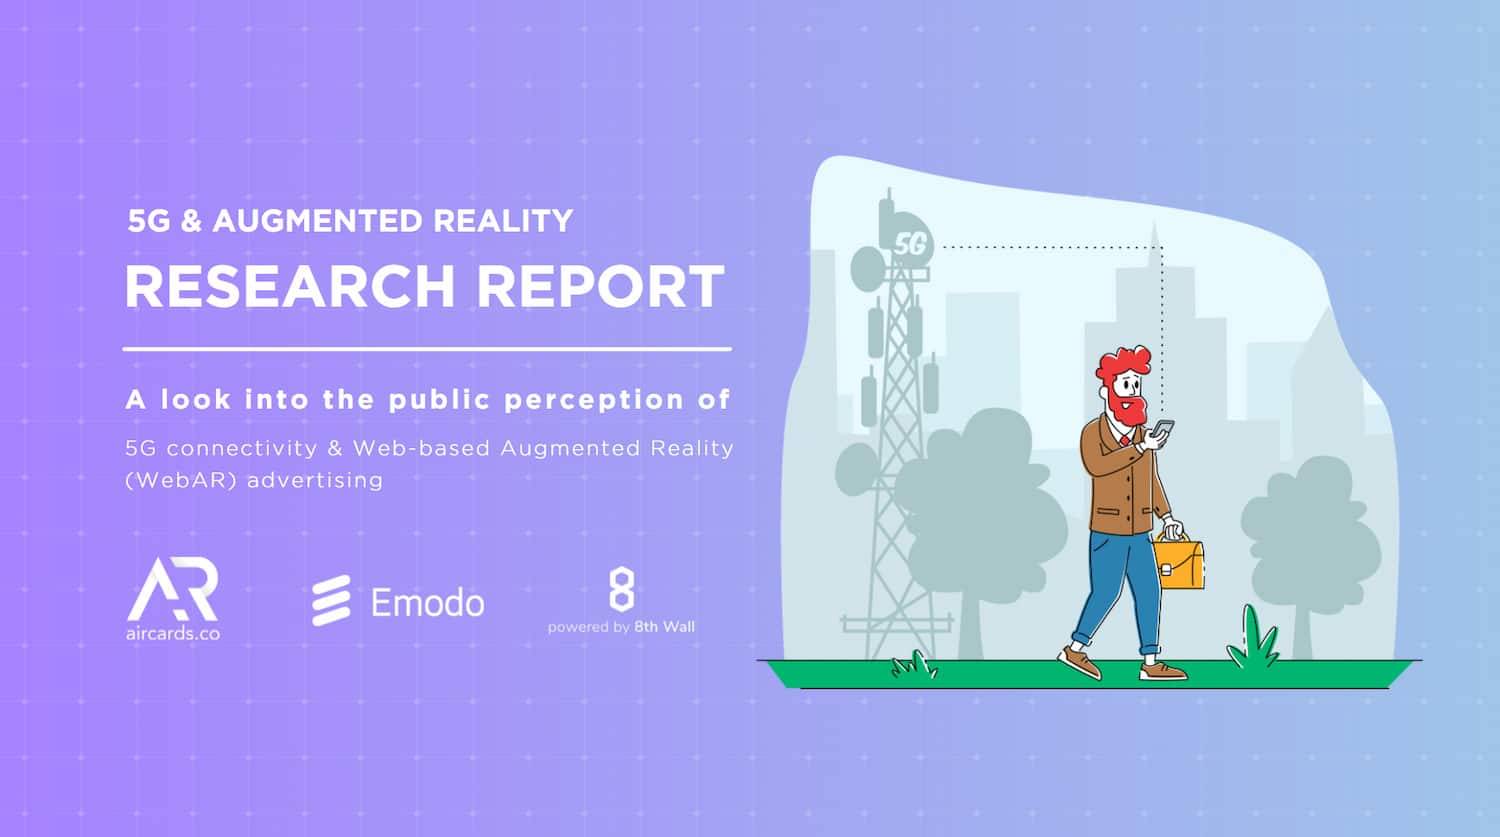 5G & AR Advertising Research Report